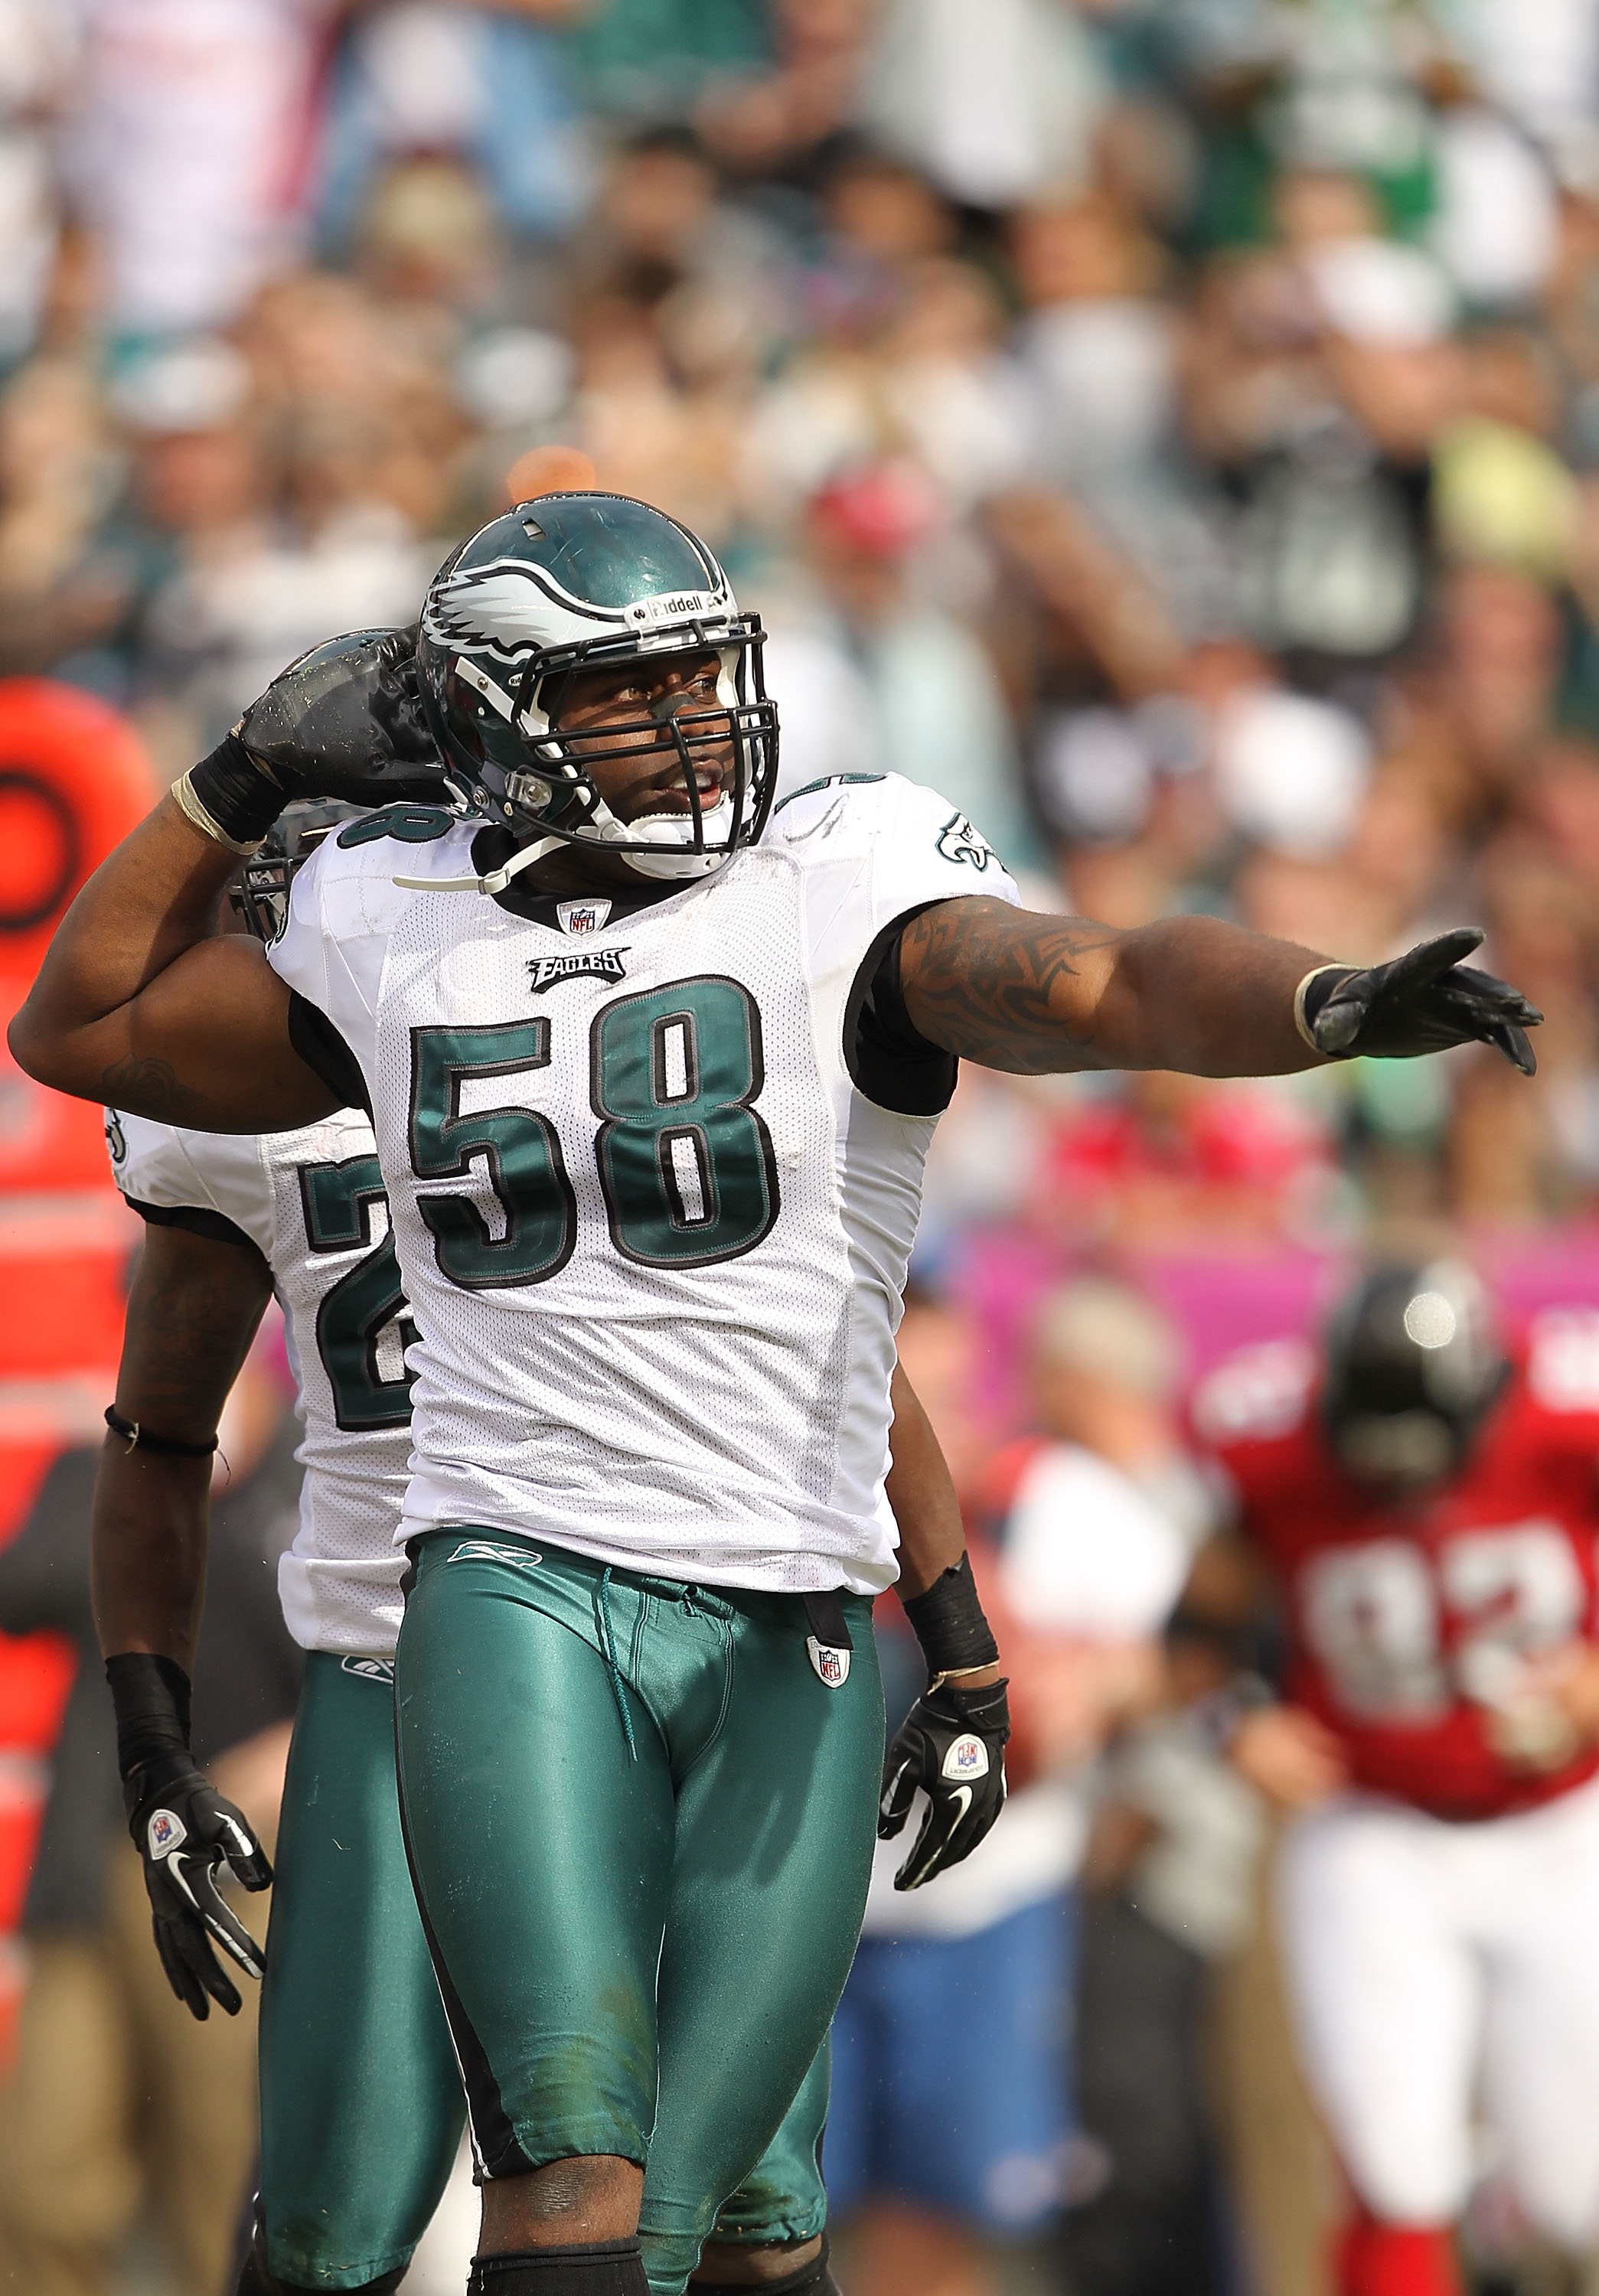 Eagles Close To Clearing Vick, McCoy But Will Be Without Celek